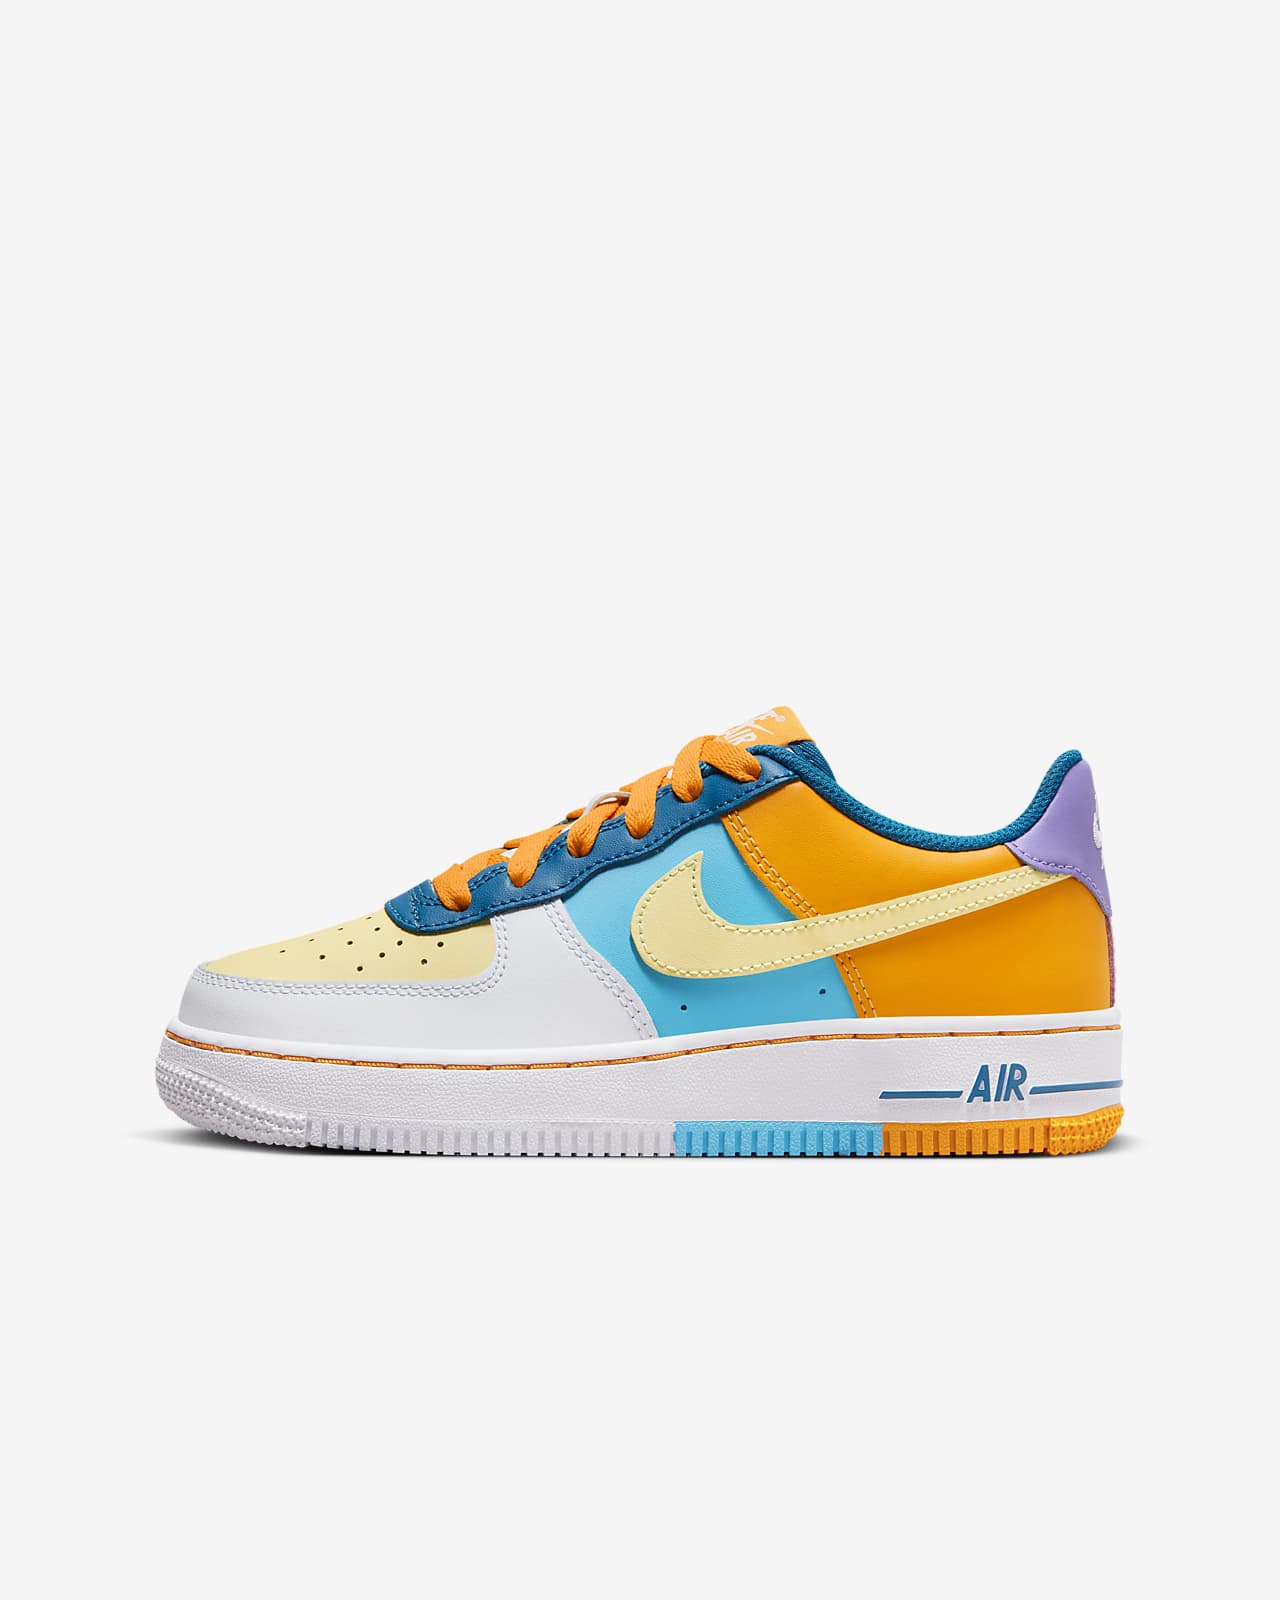 Nike Air Force 1 LV8 Older Kids' Shoes Size 4Y (Multi-Colour)